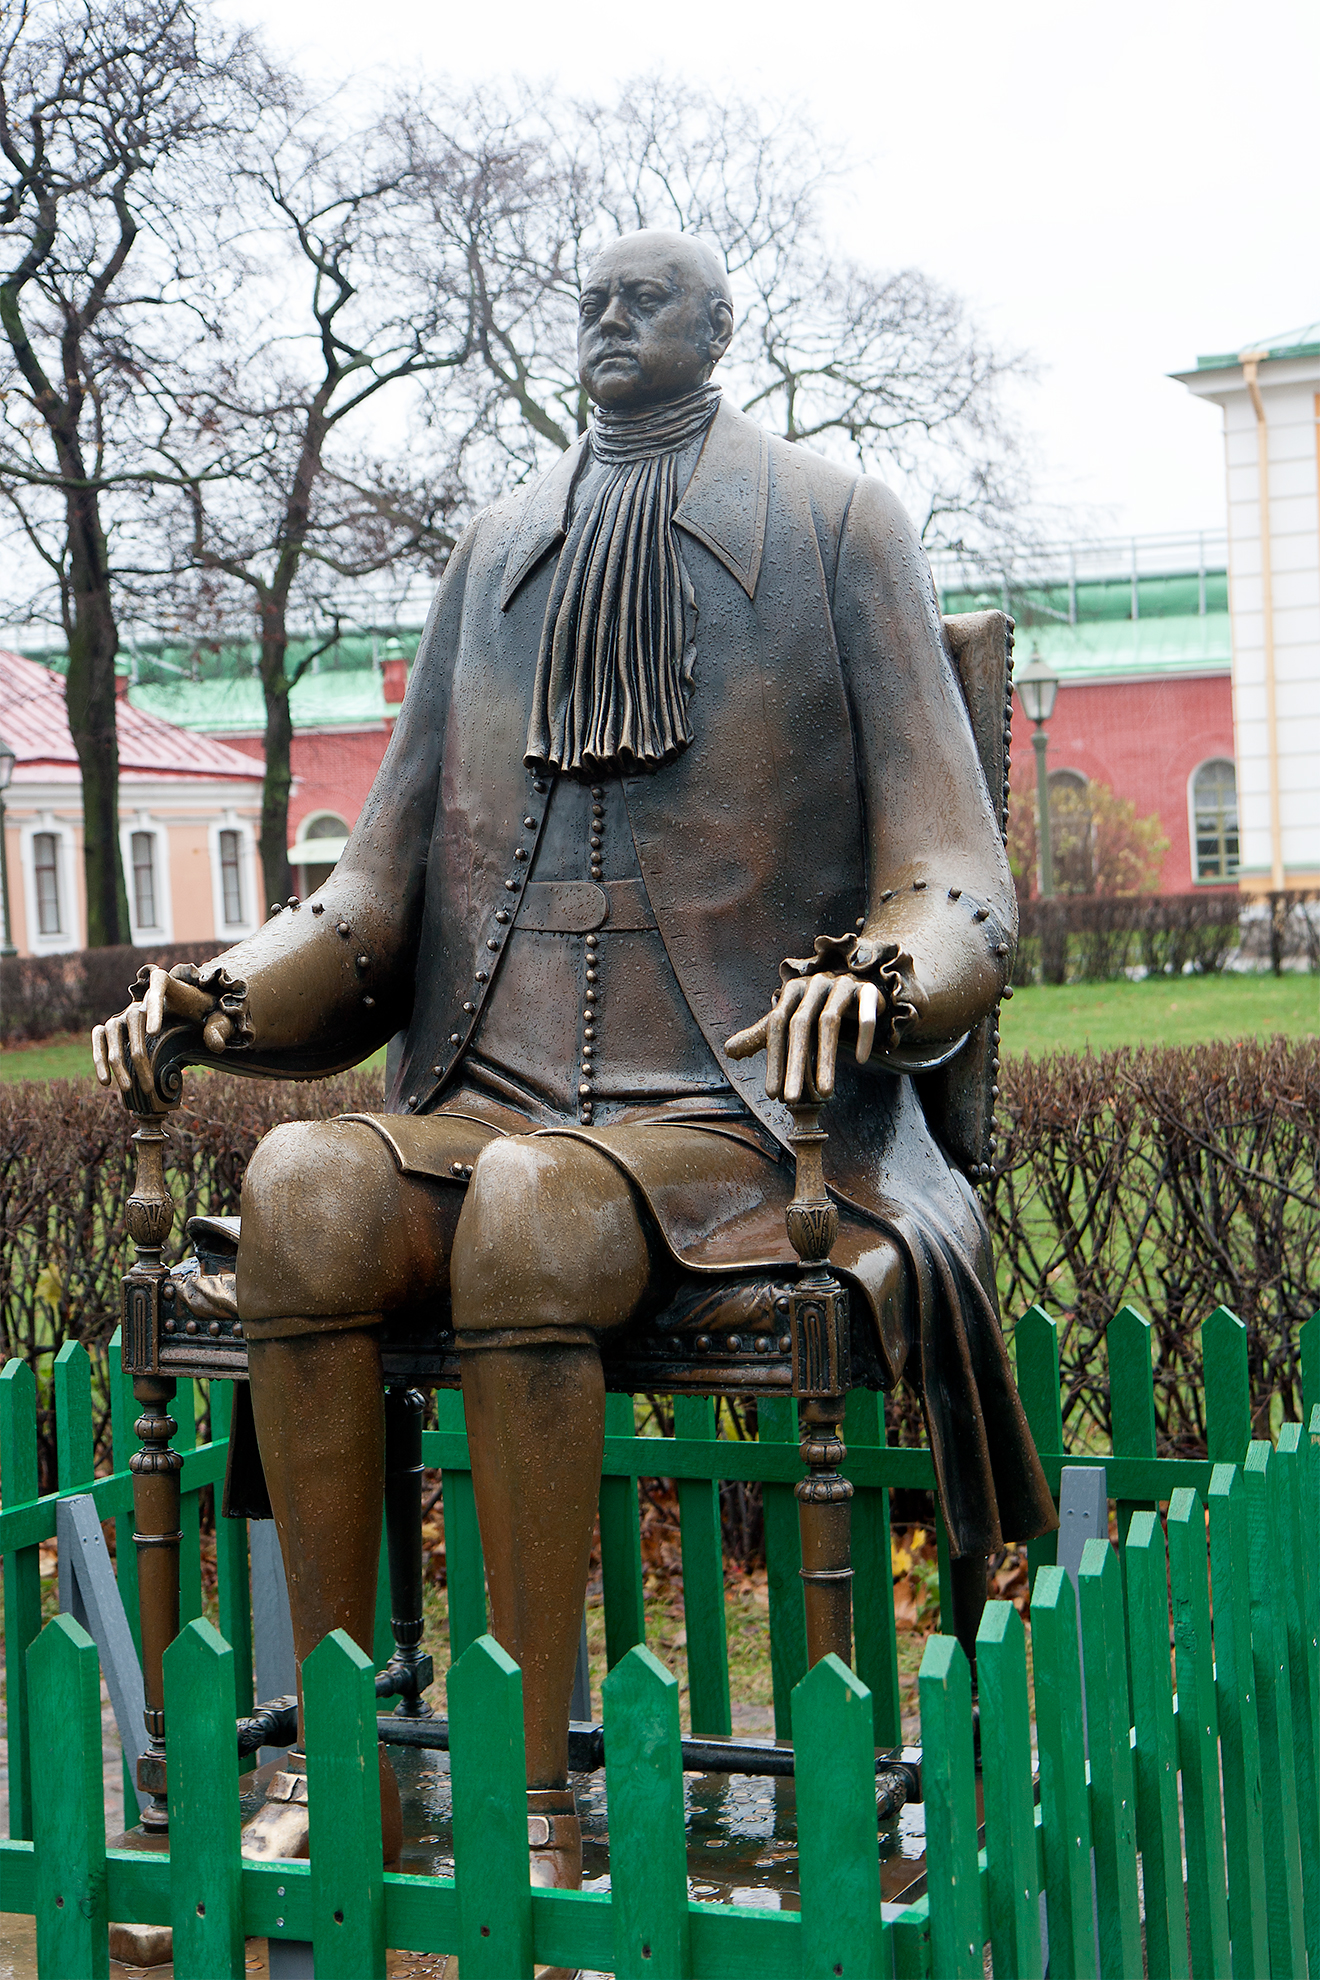 Peter the great